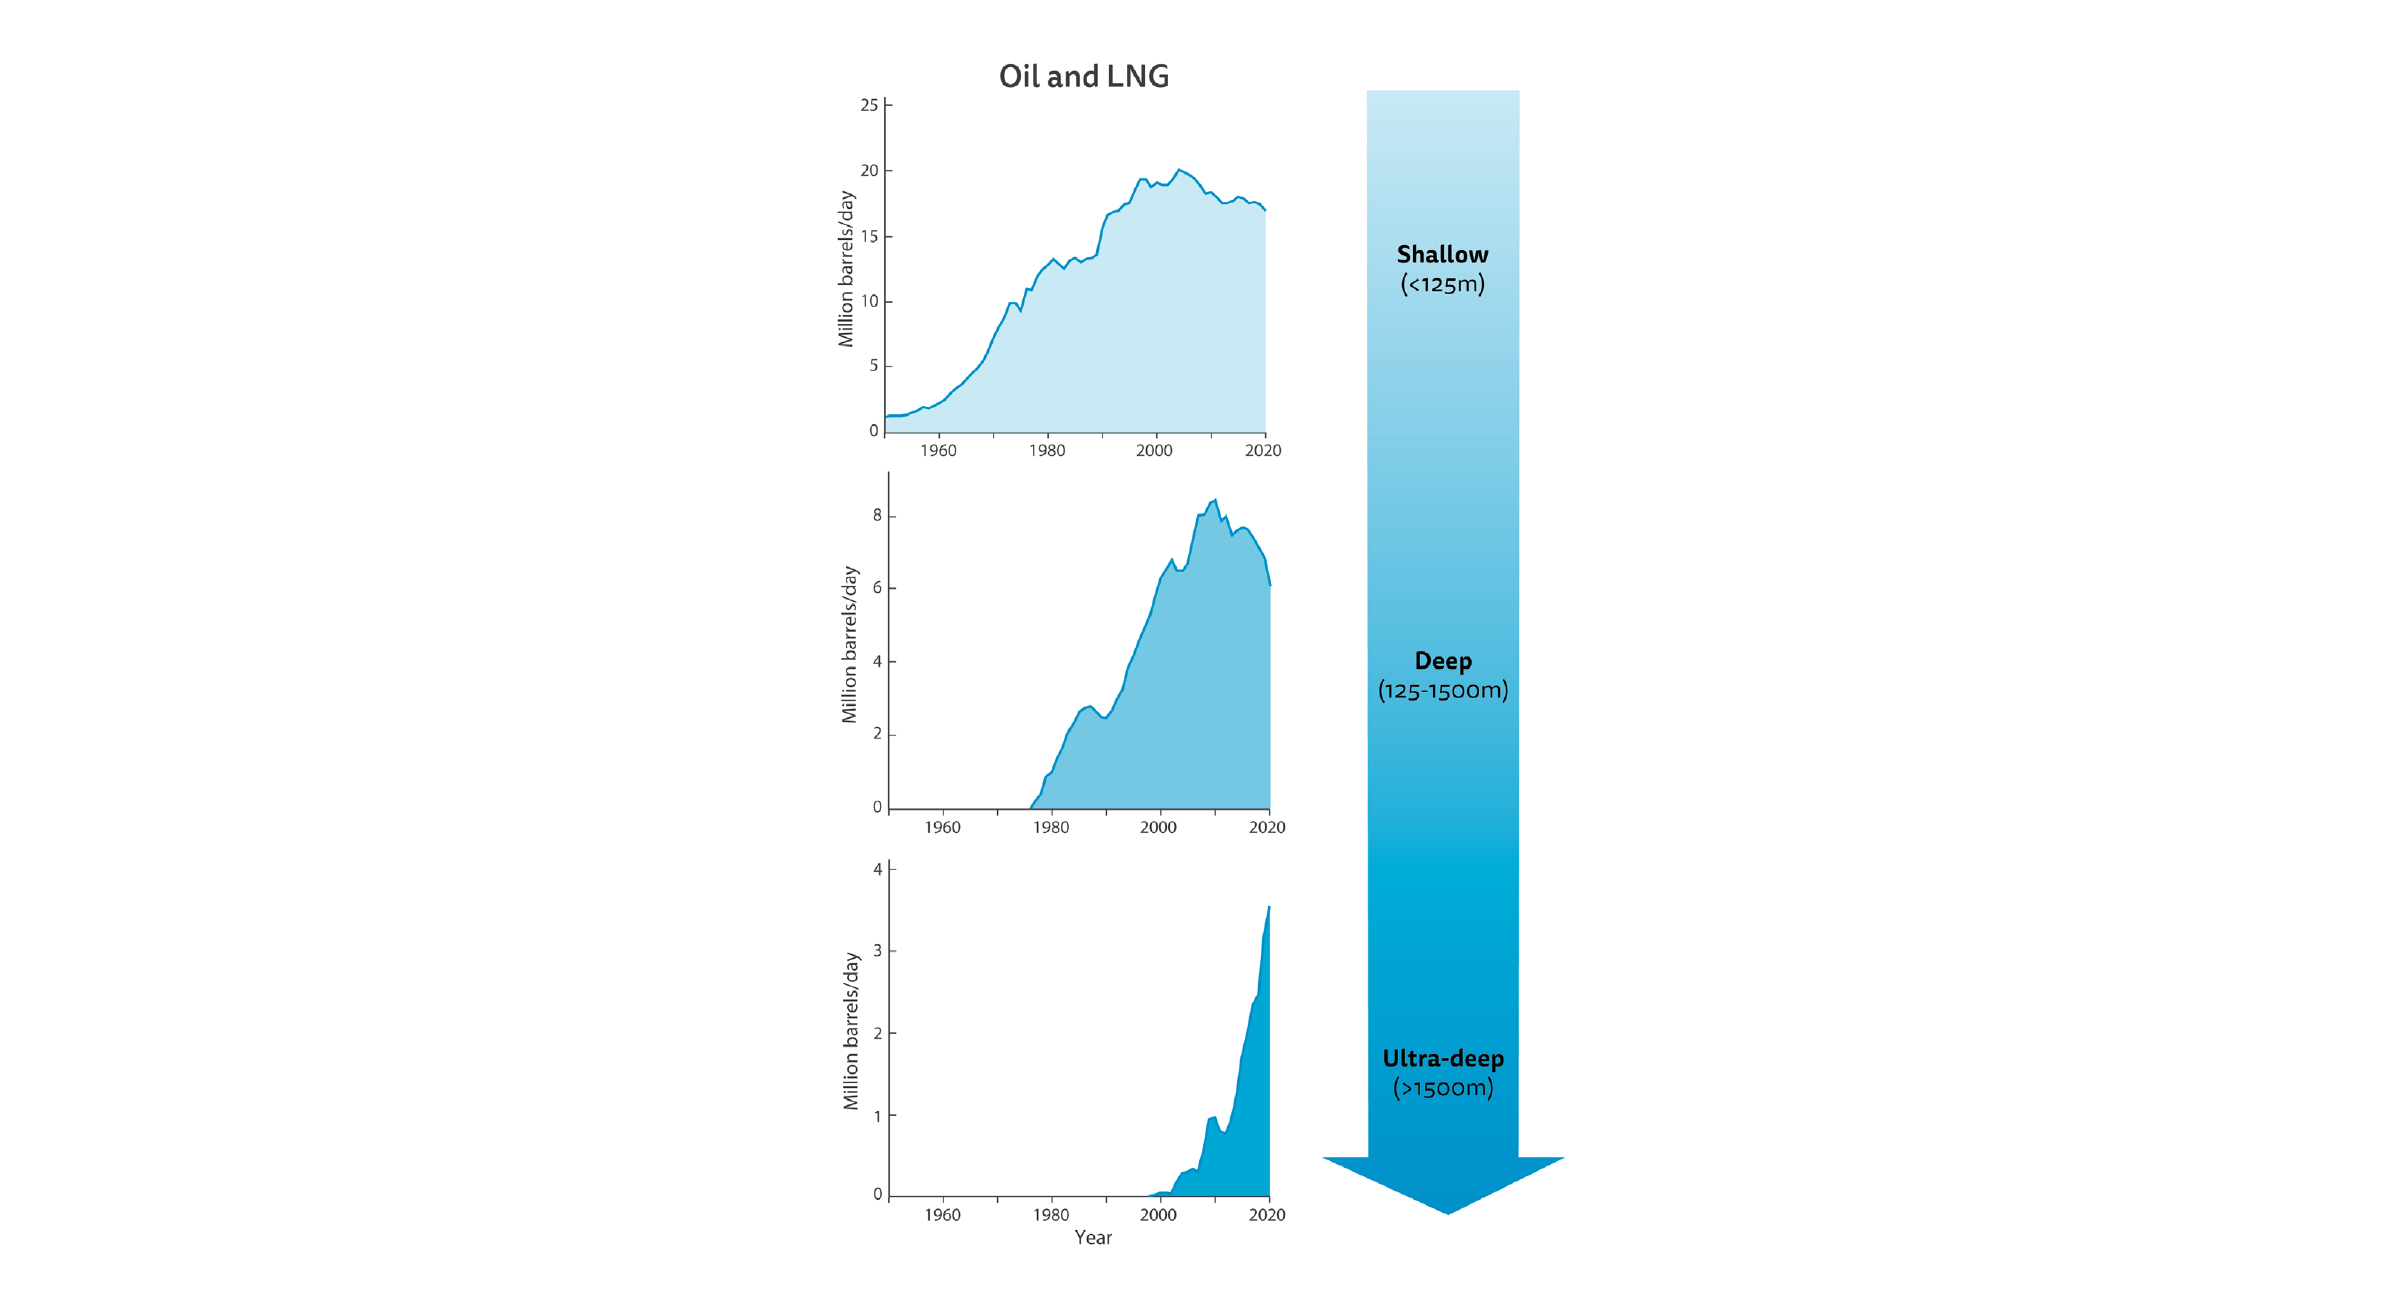 Production trends over time of crude oil and LNG